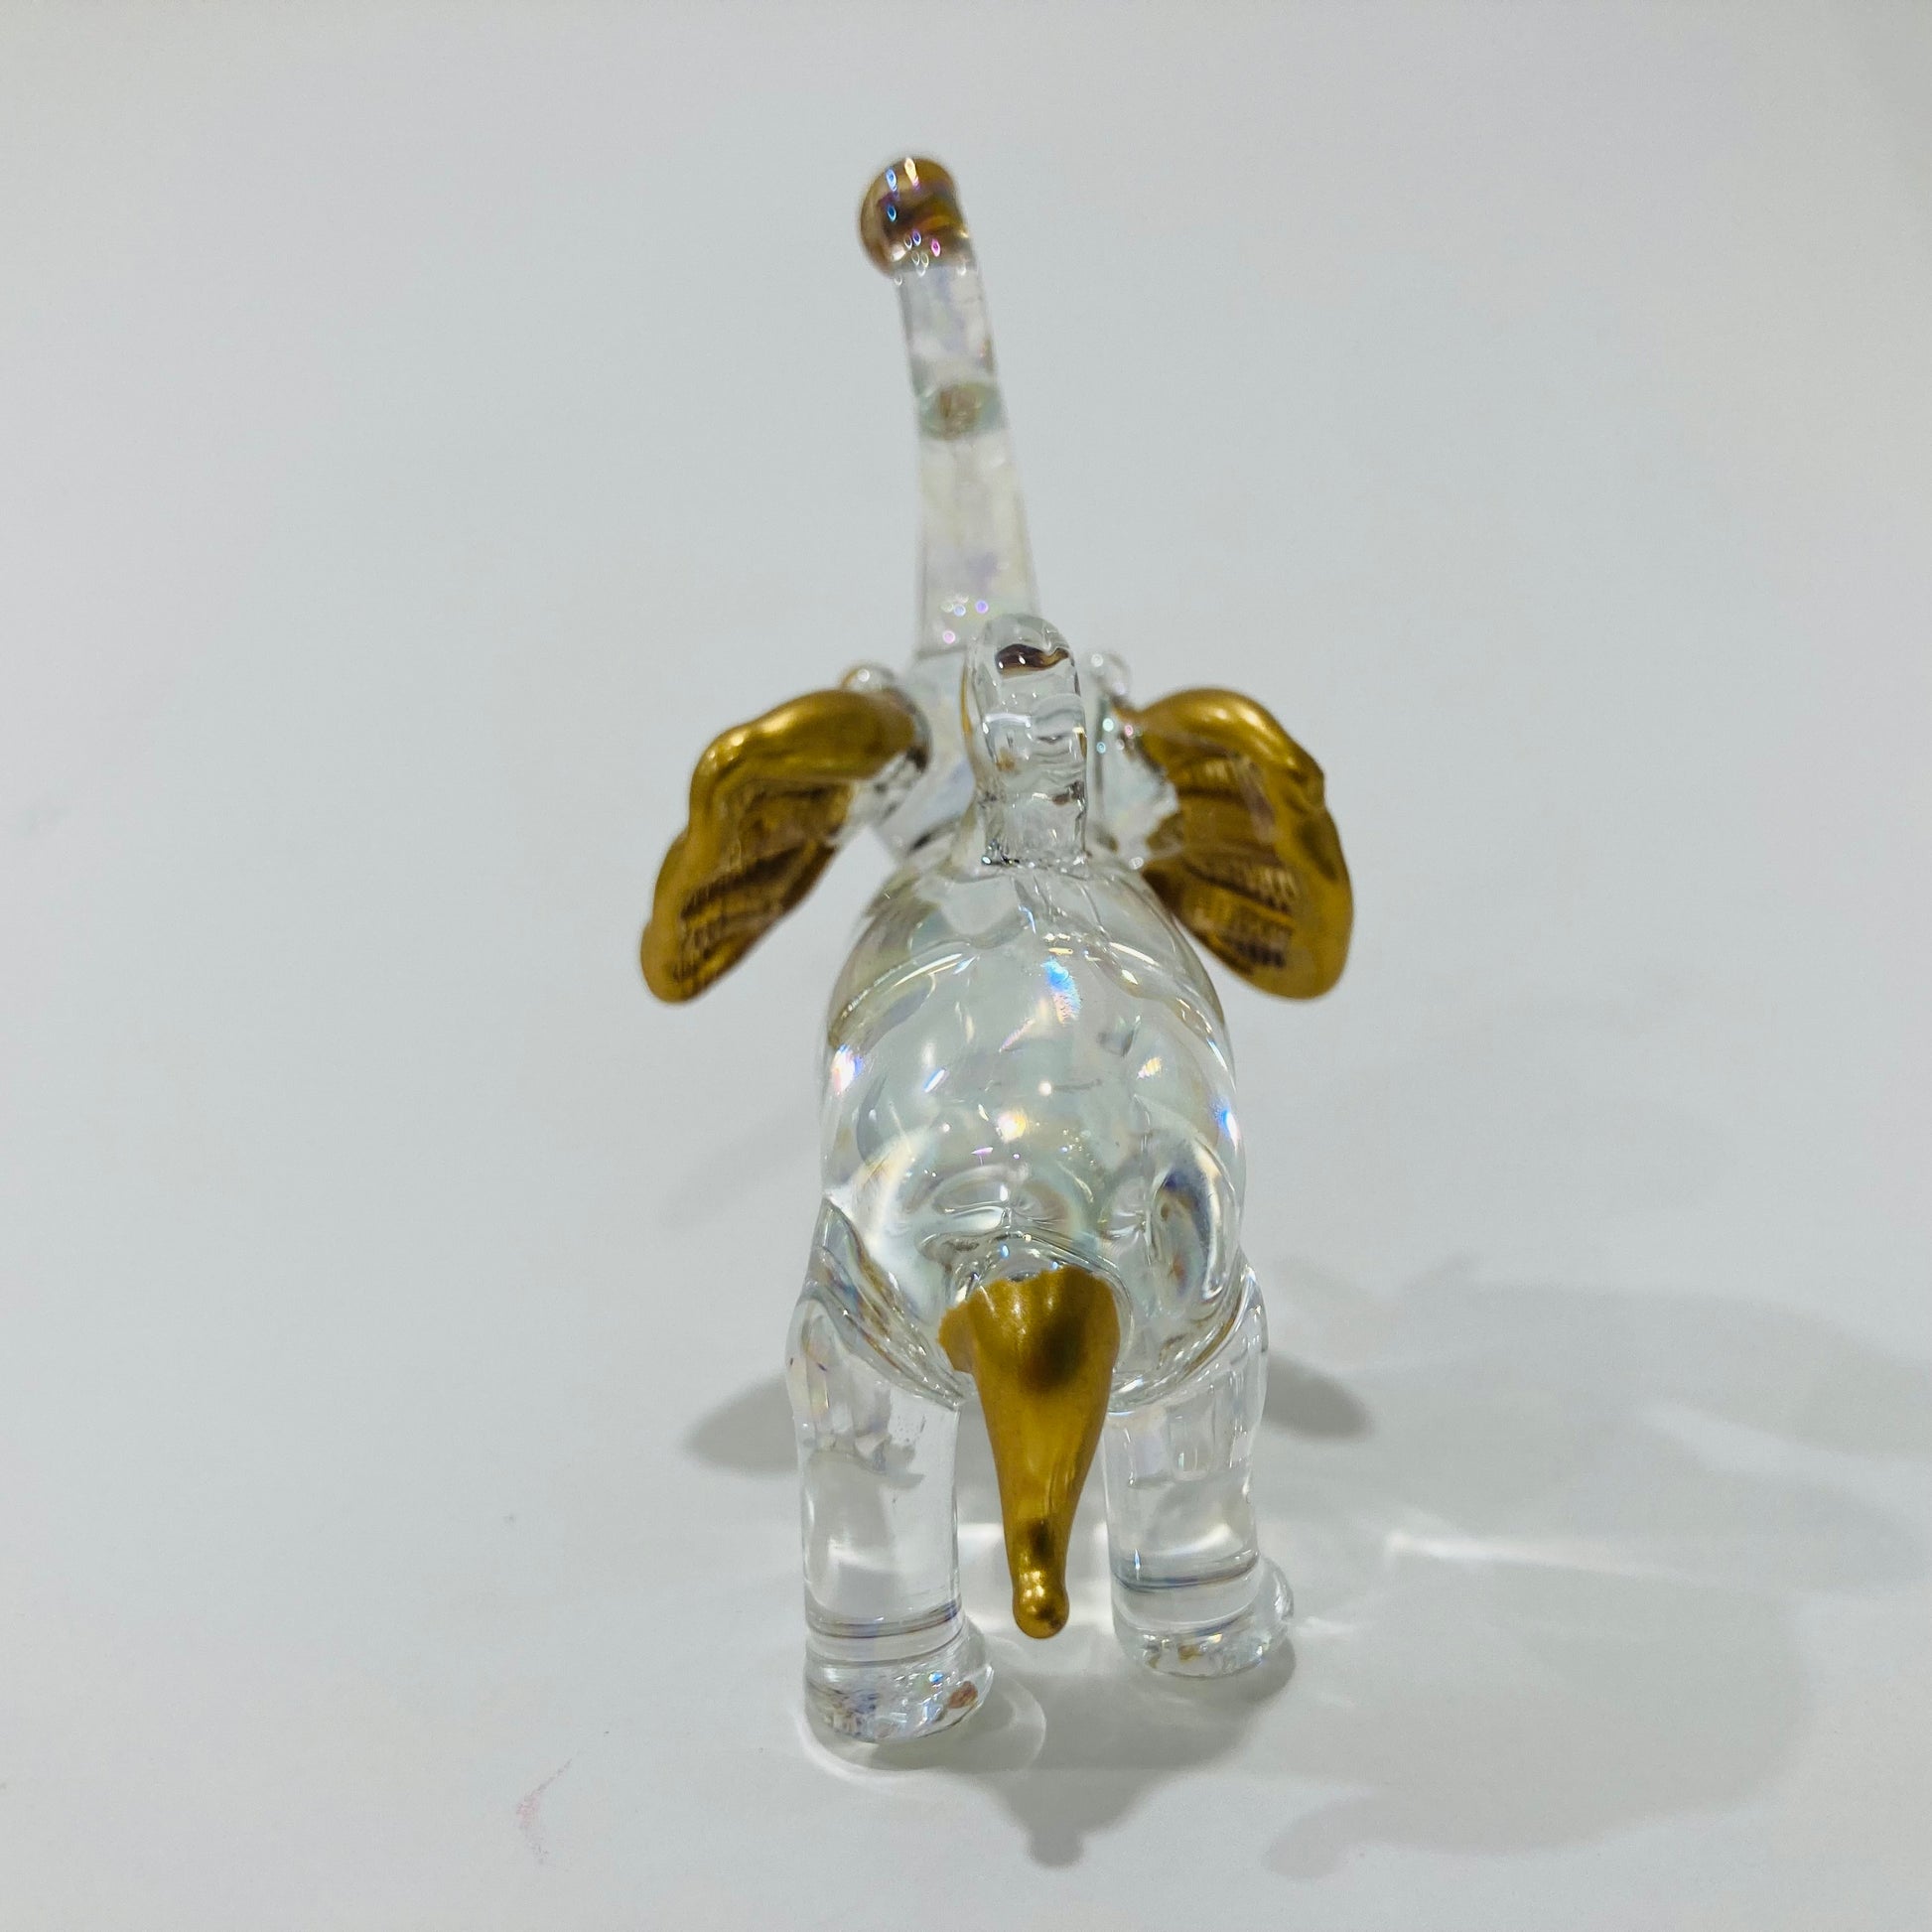 Handcrafted Glass Ornament - Elephant